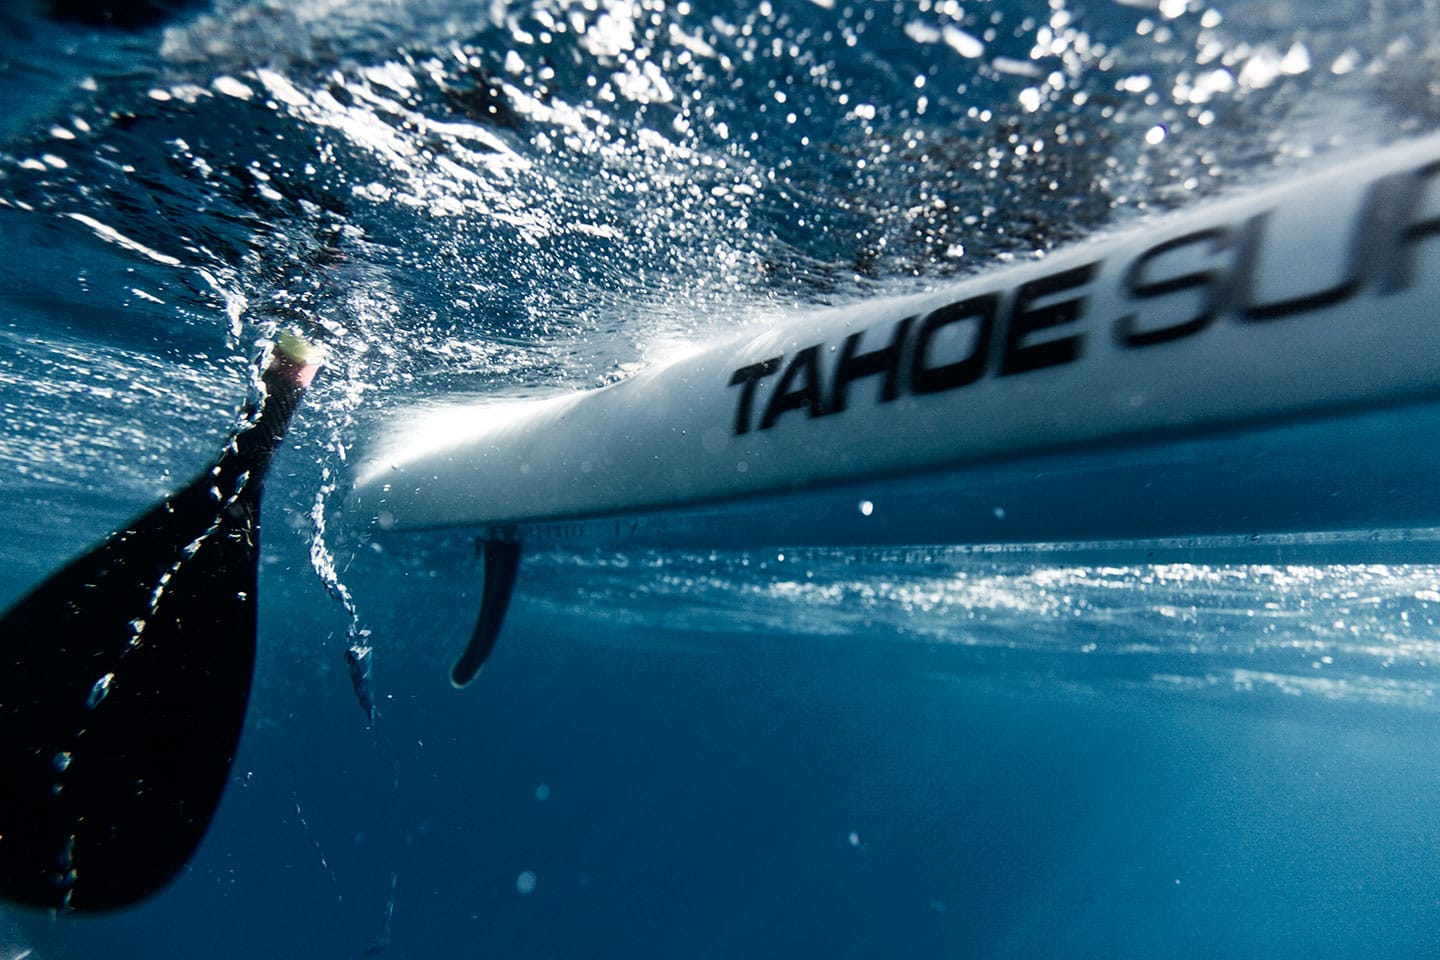 Underwater Image Surf Kayak and Paddle Waves Above